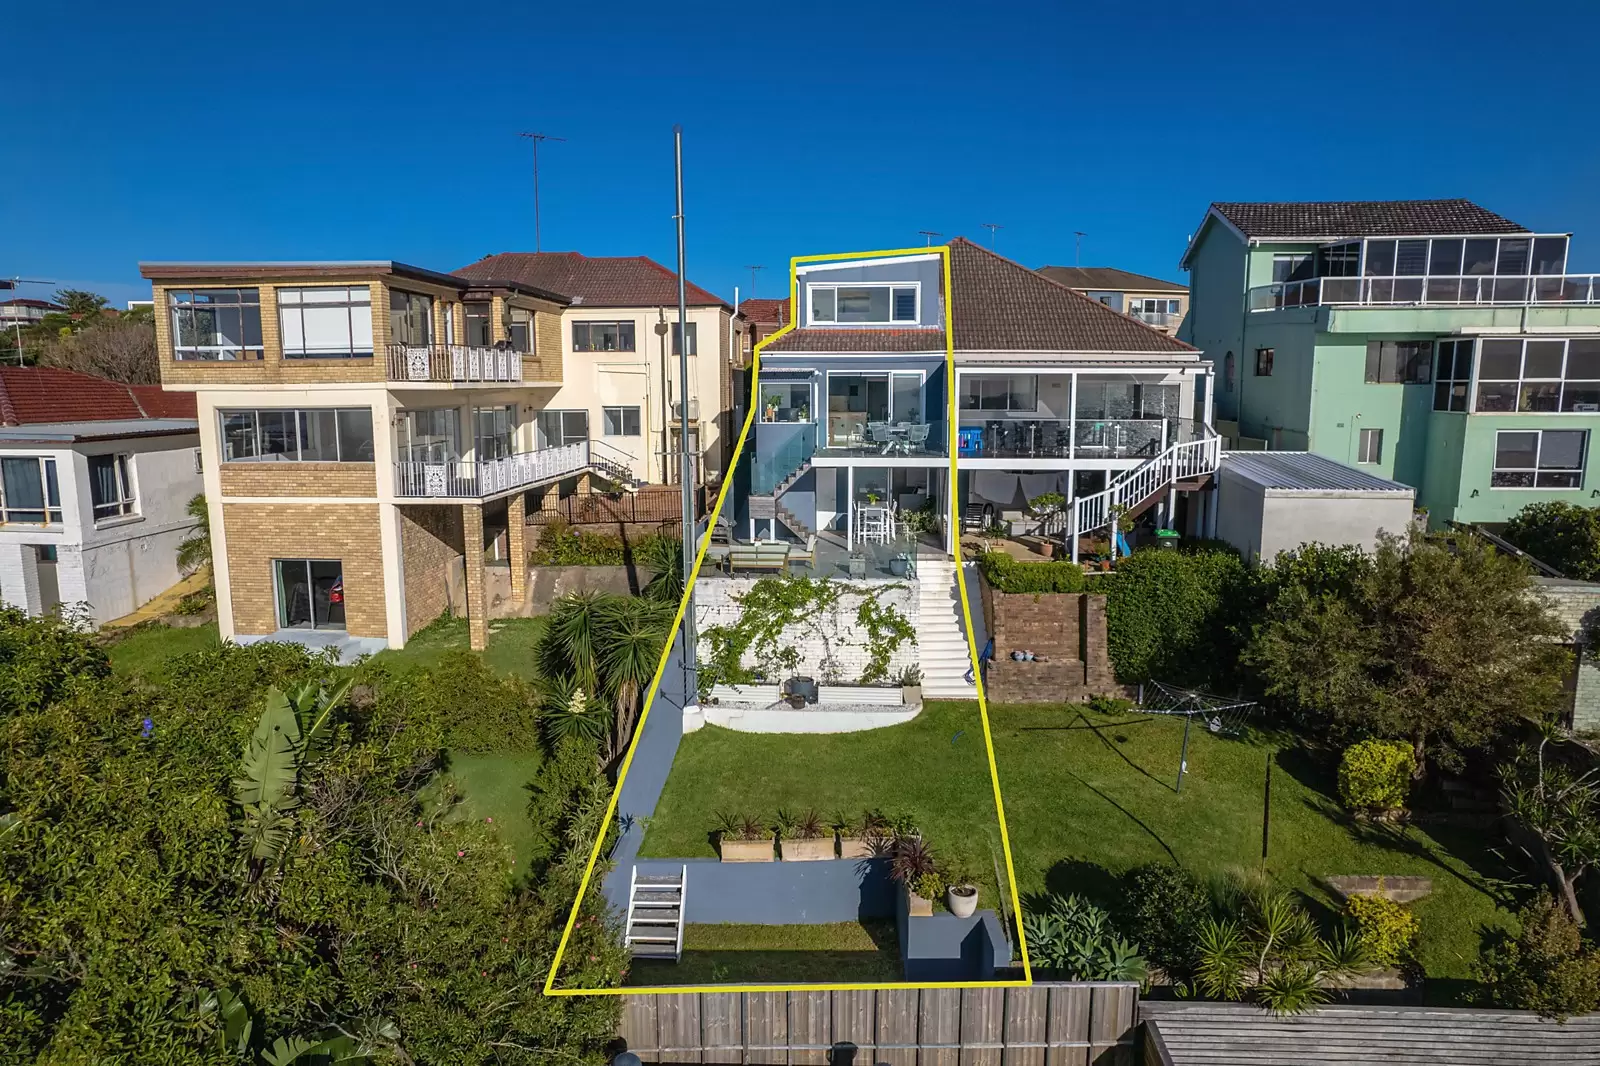 Photo #16: 73 Denning Street, South Coogee - Sold by Sydney Sotheby's International Realty